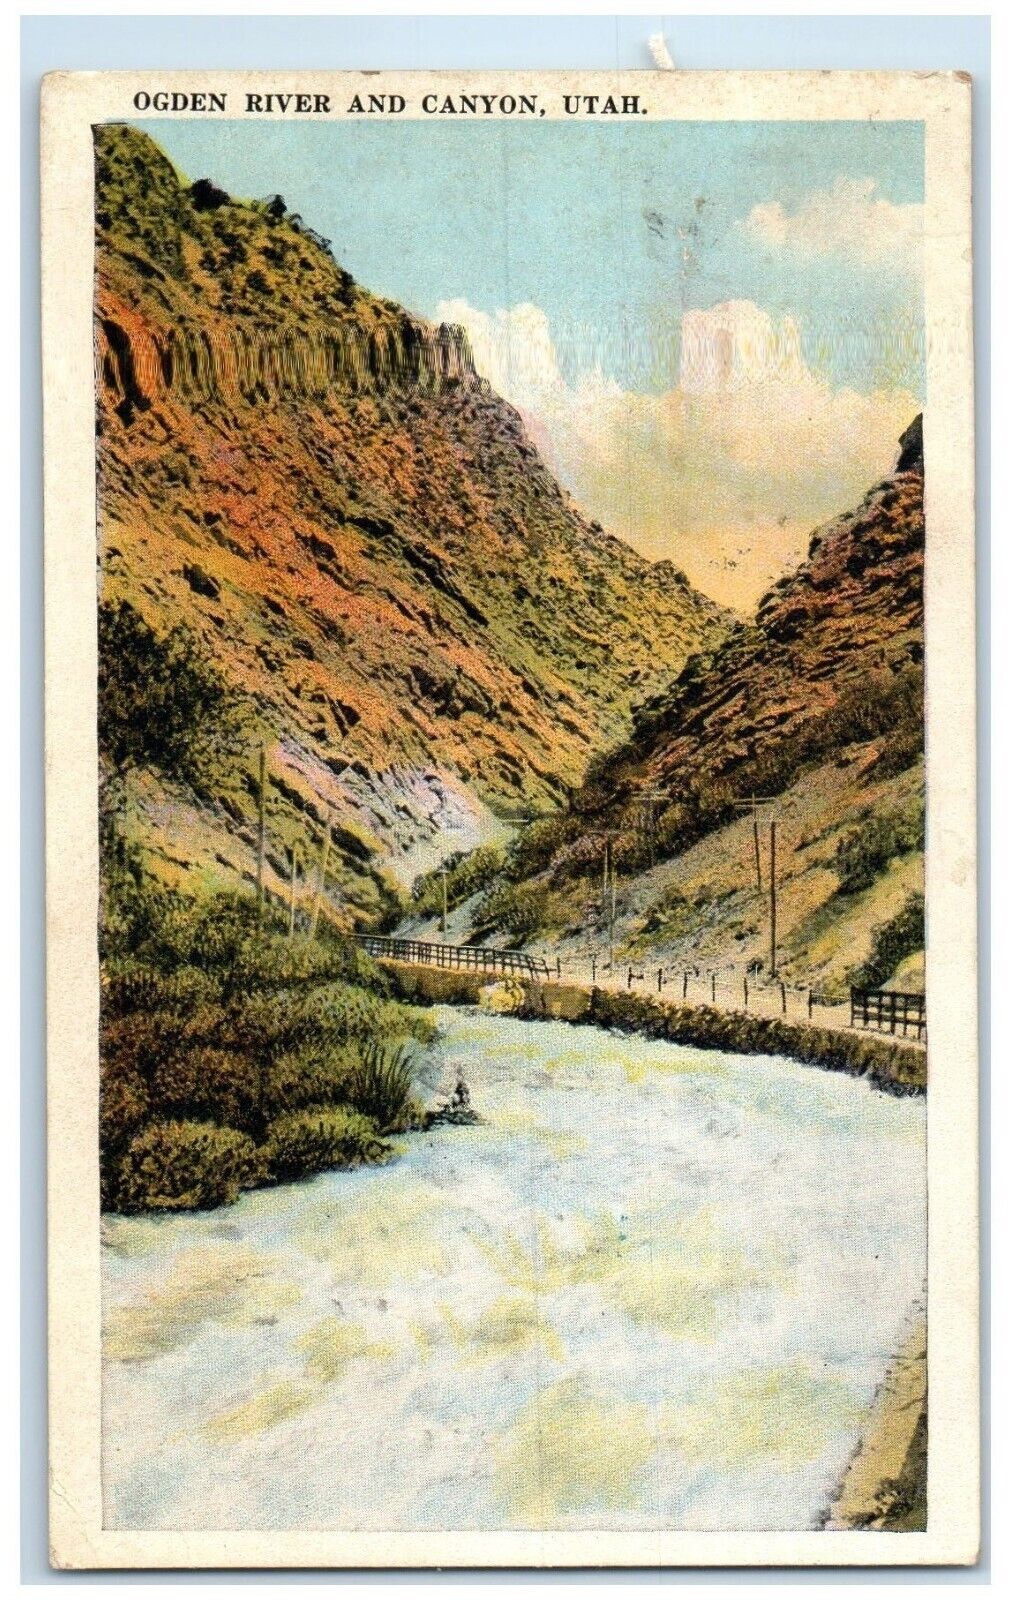 1920 Scenic View Ogden River Mountains Road Street Canyon Utah Antique Postcard